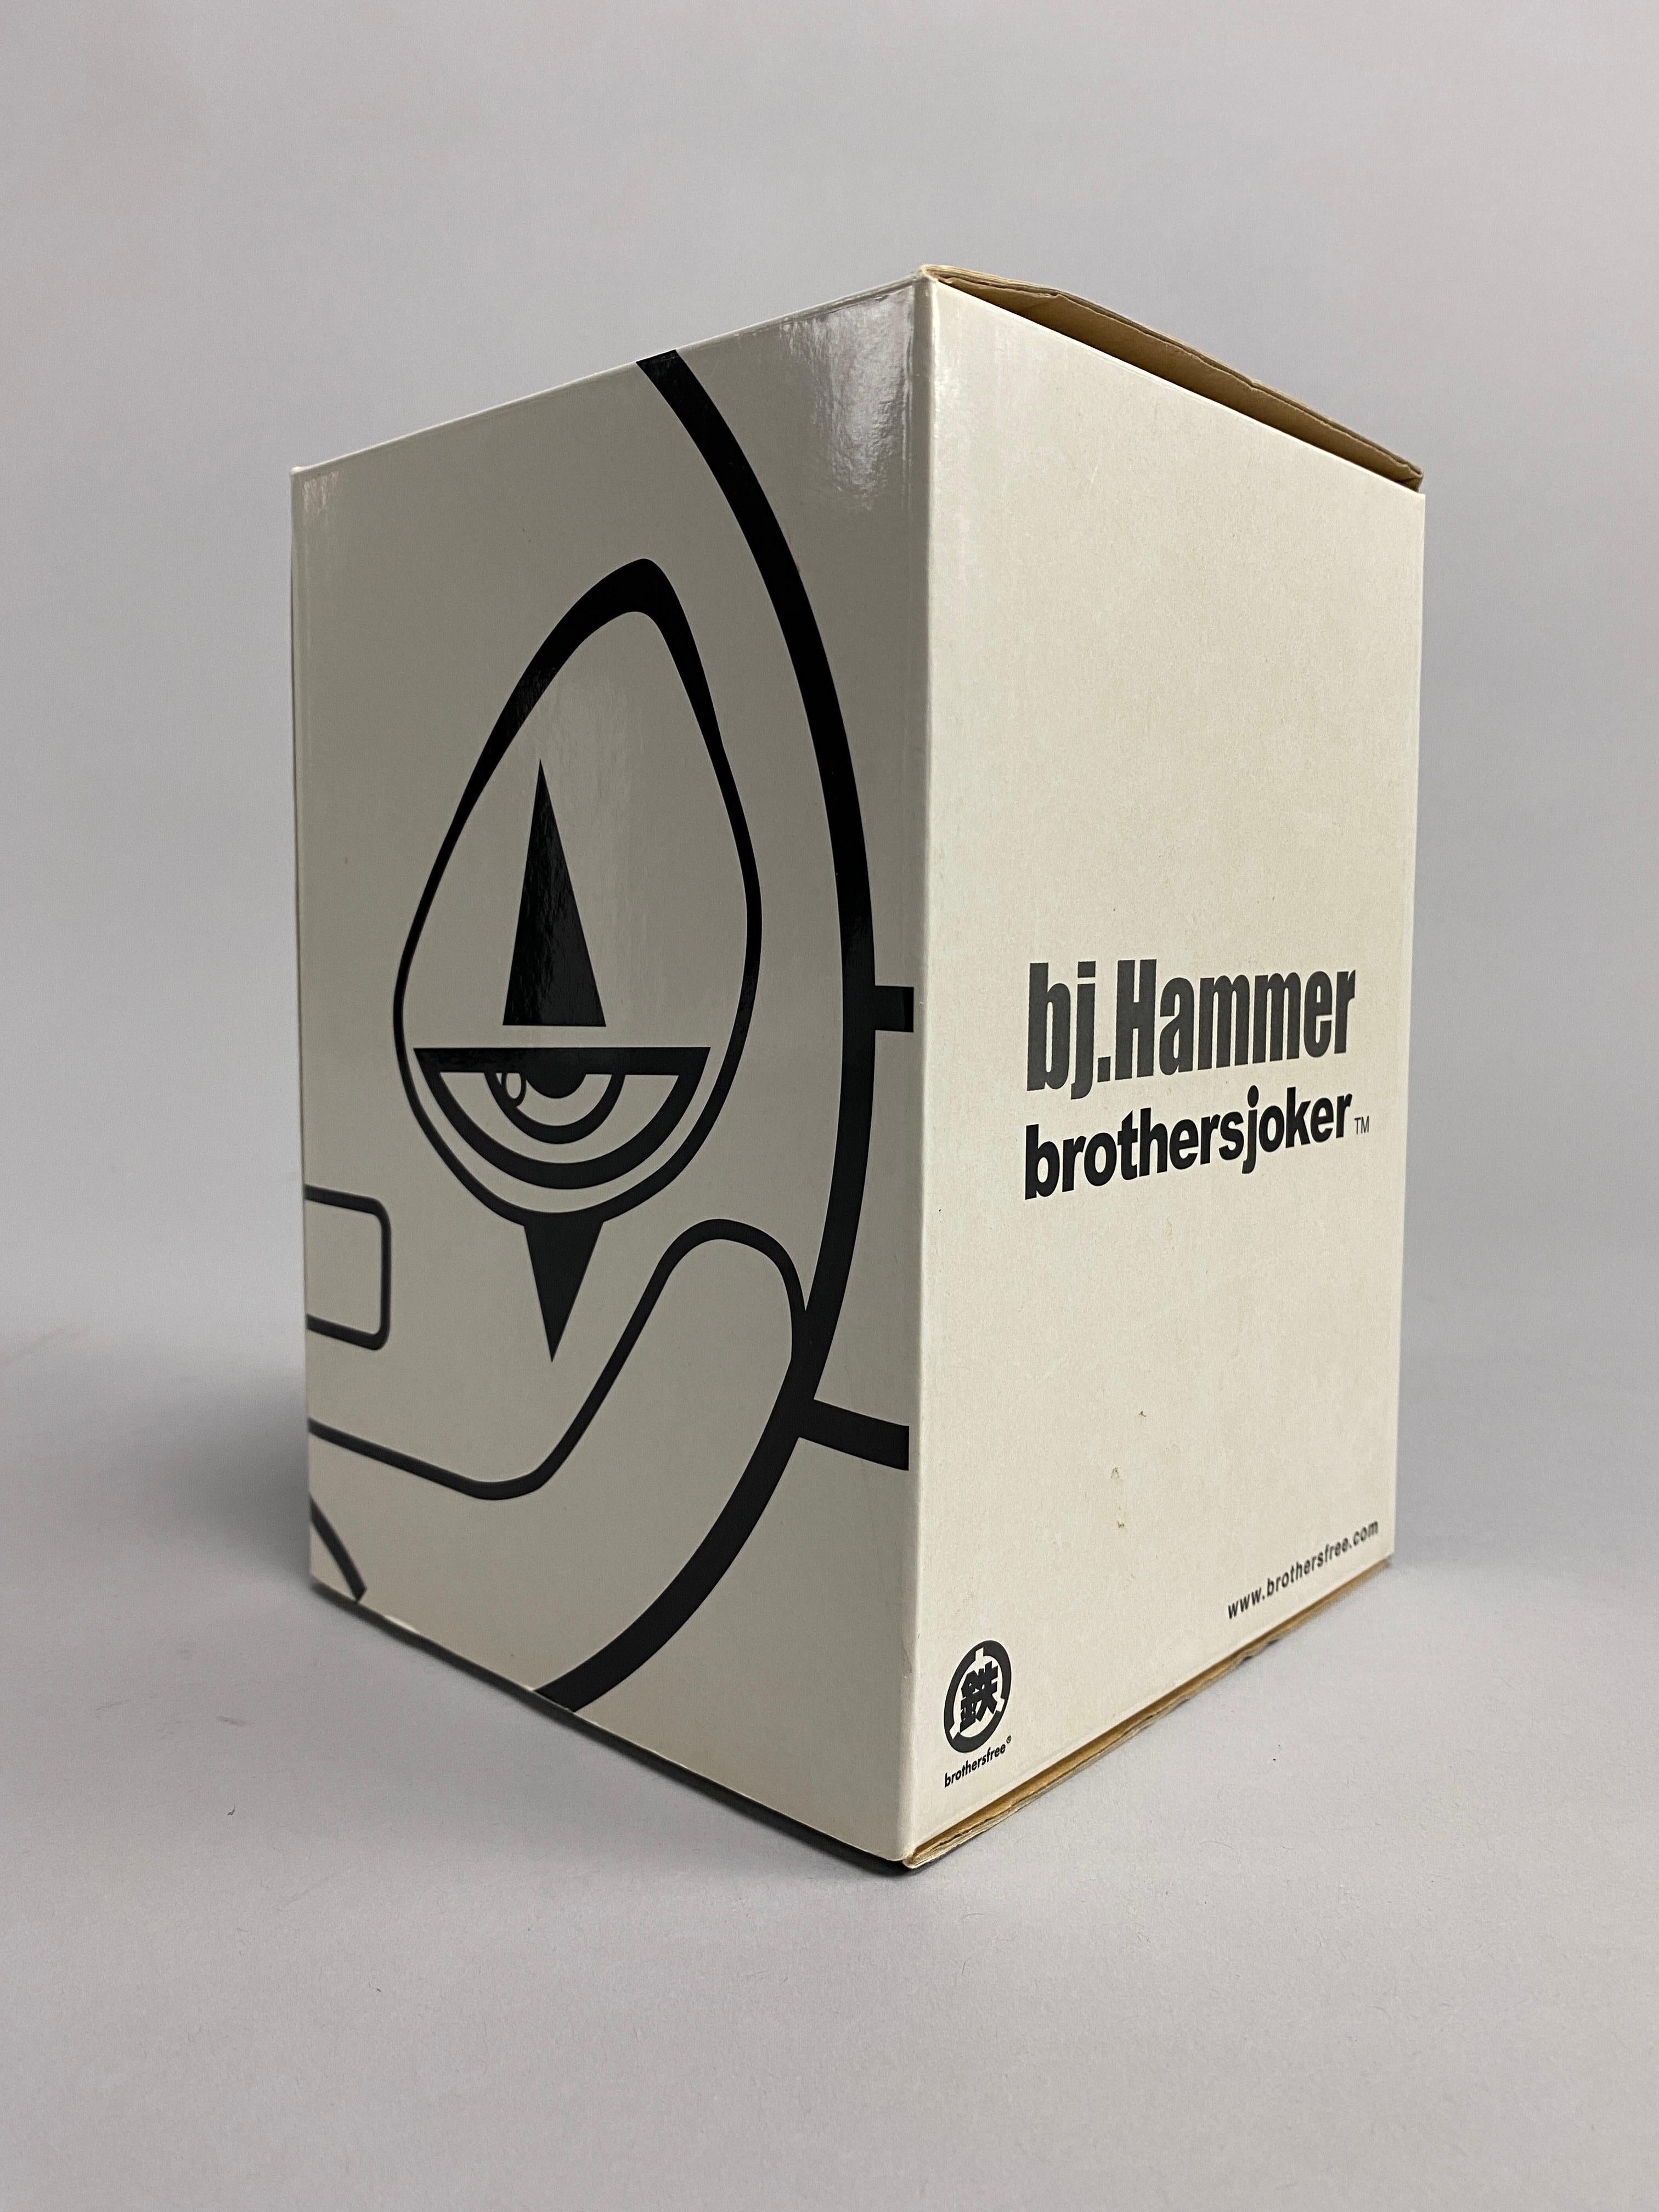 2003 Designer Toy BJ Hammer by Brothersfree For Sale 1